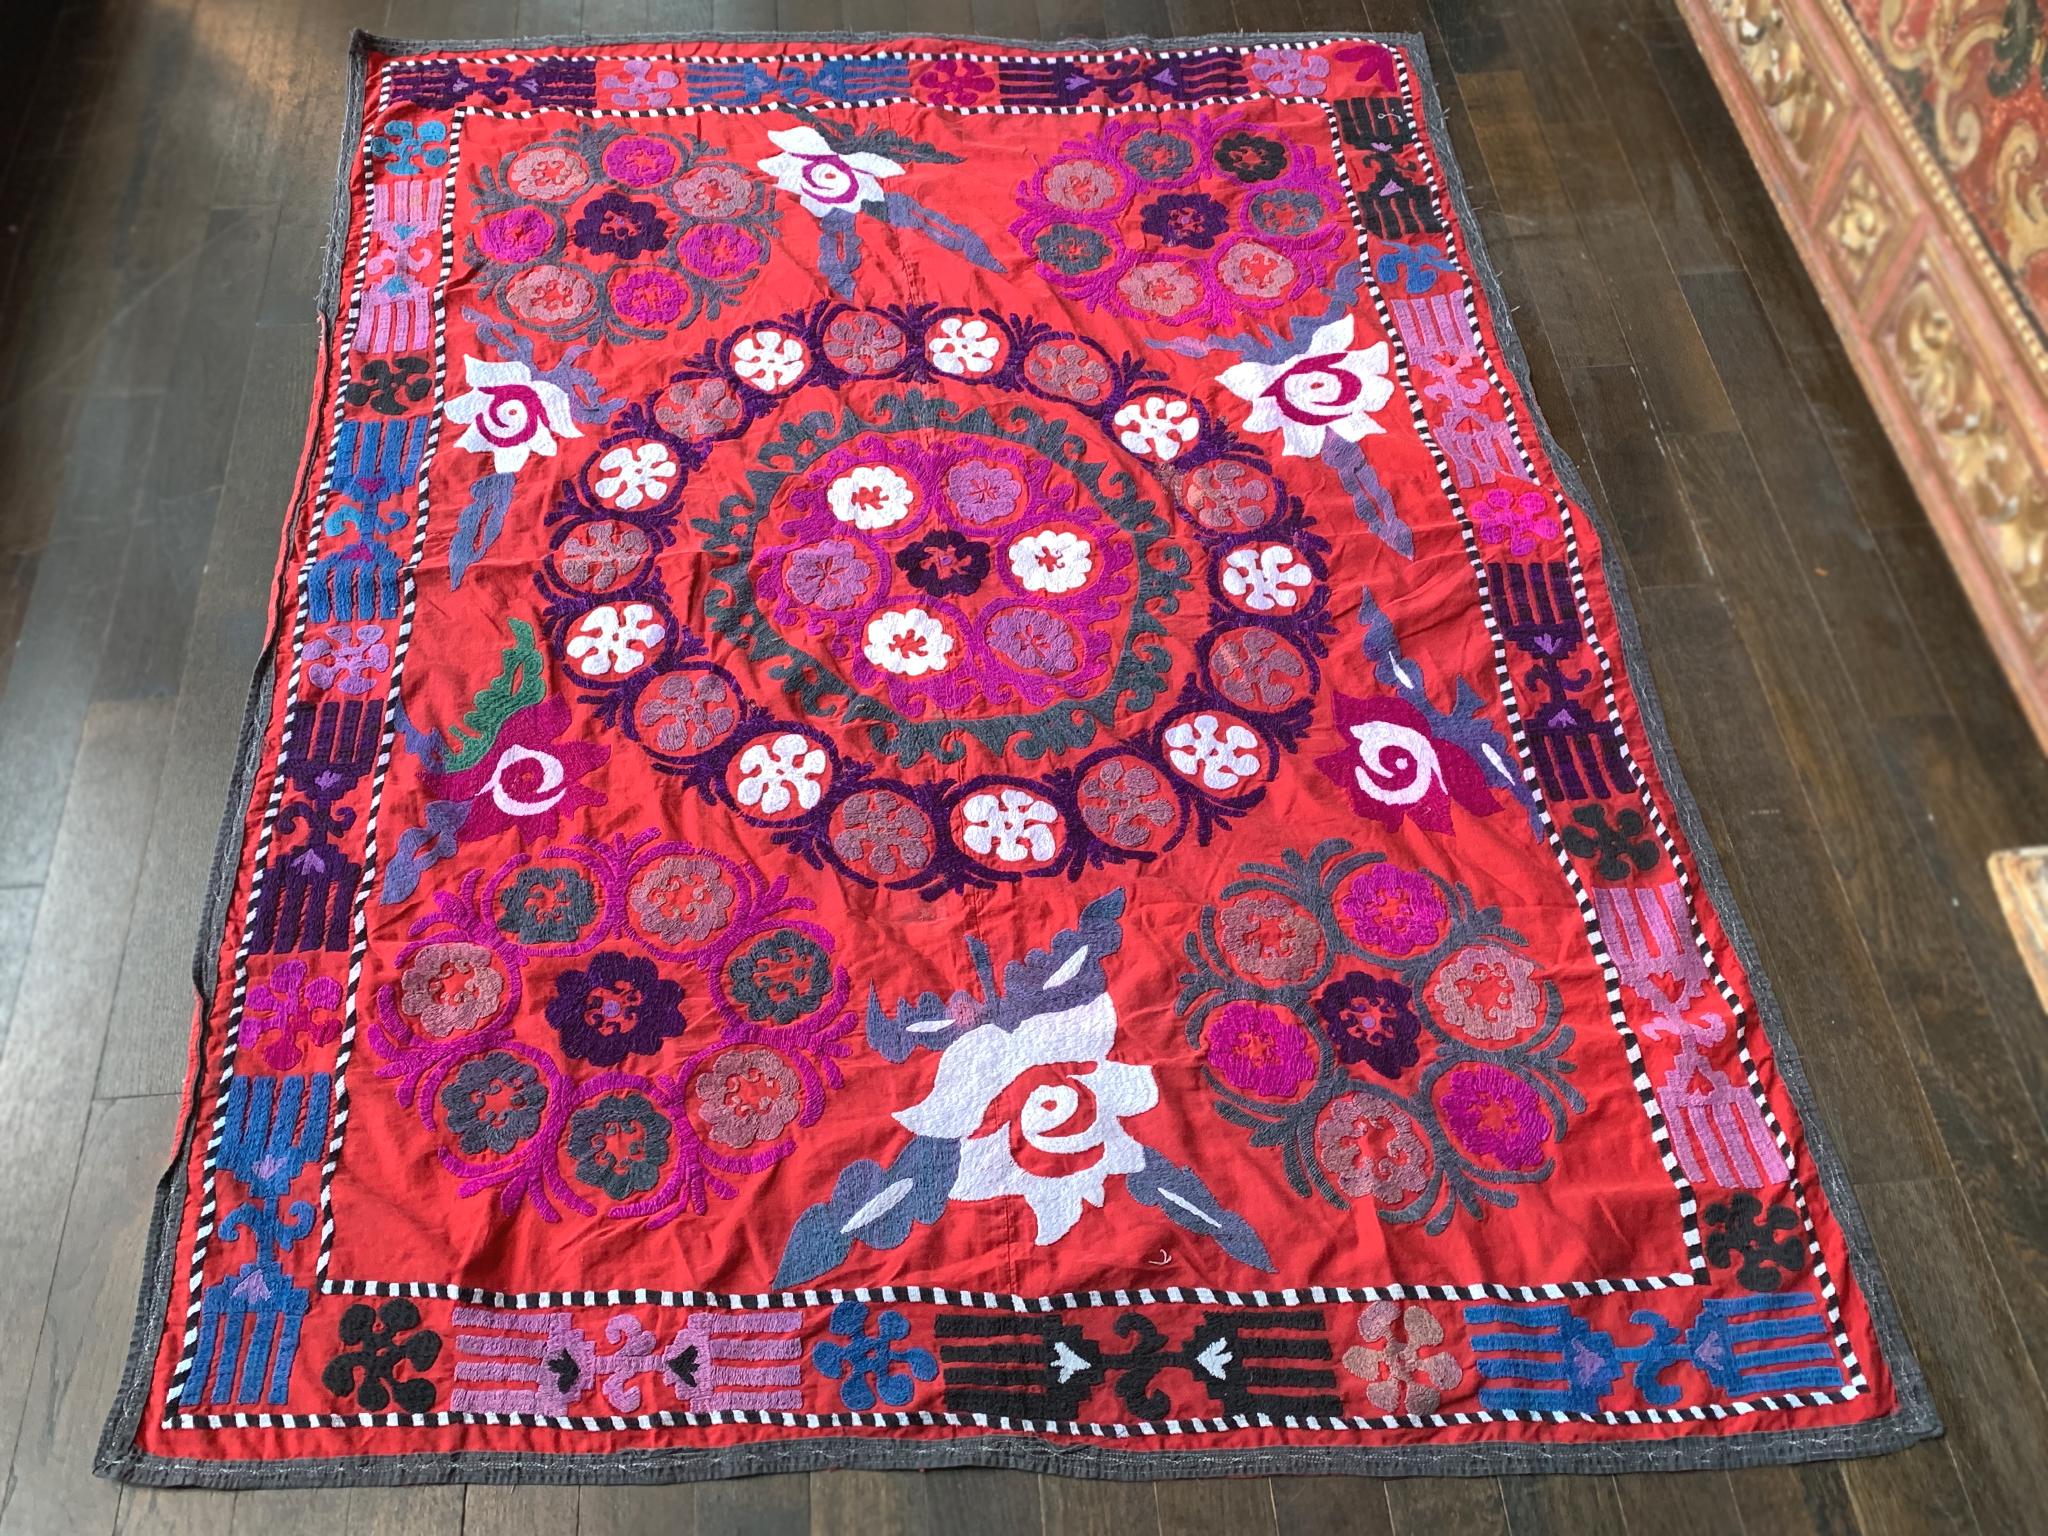 A lovely Suzani hand sewn and hand-embroidered in the 20th century. It's comprised of a deep red base fabric with embroidery in a palette of pink, blue, green, purple, black, and white. A traditional floral design populates the central field which